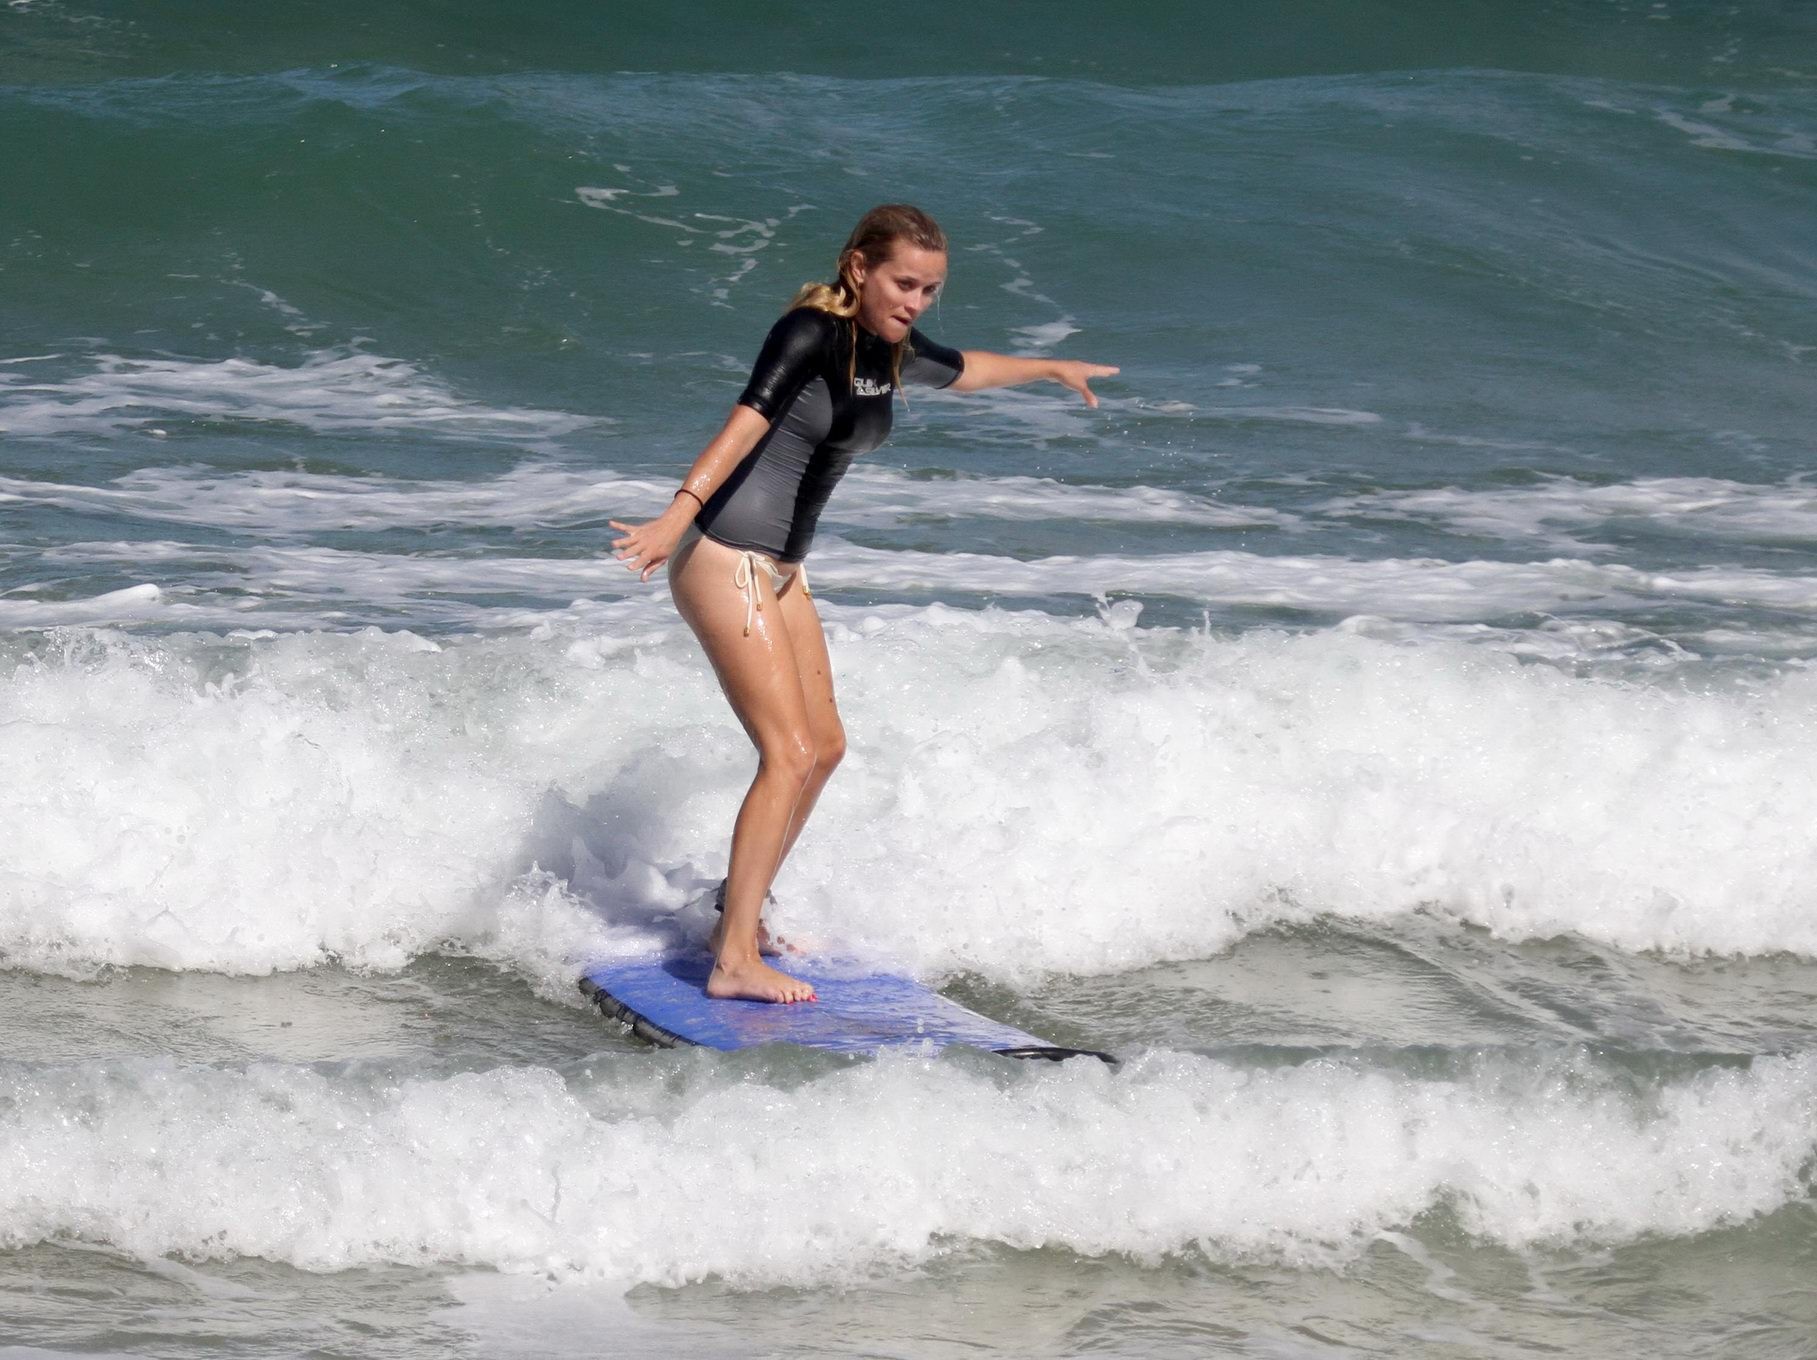 Reese Witherspoon mostra il suo culo mentre fa surf alle Hawaii
 #75291207